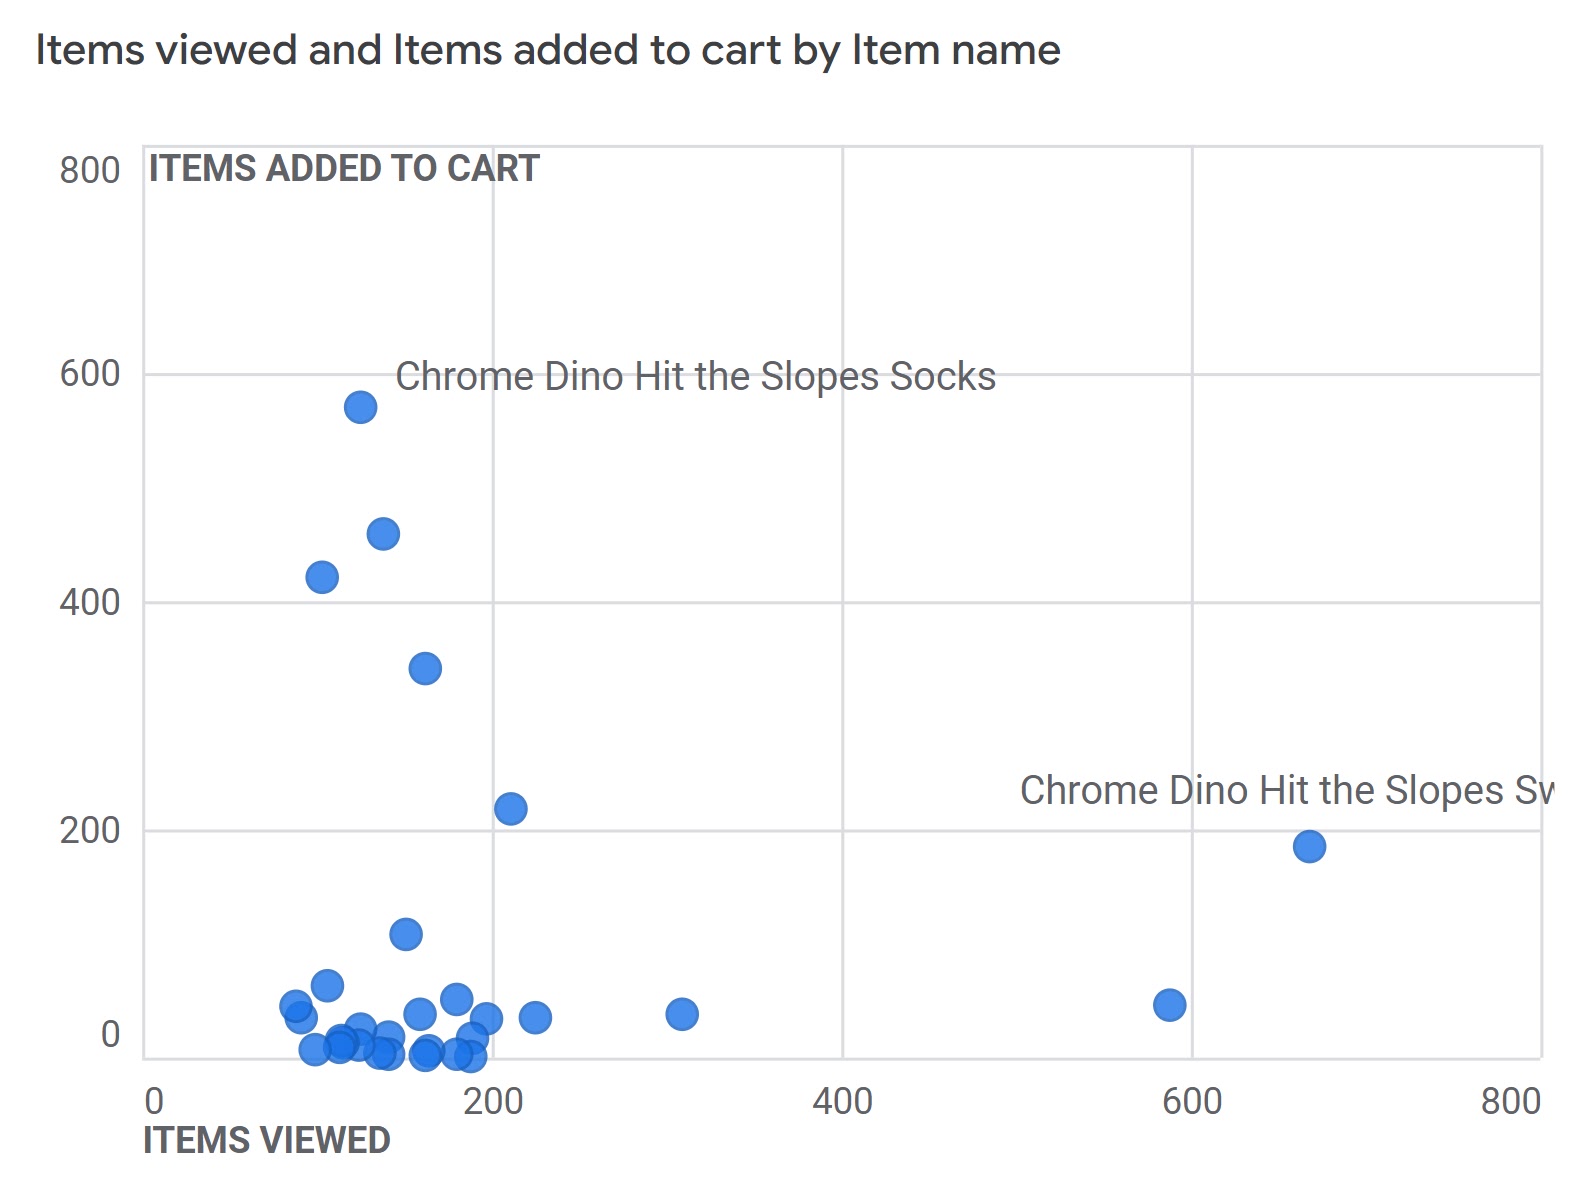 "Items viewed and items added to cart by item name" data in Google Analytics